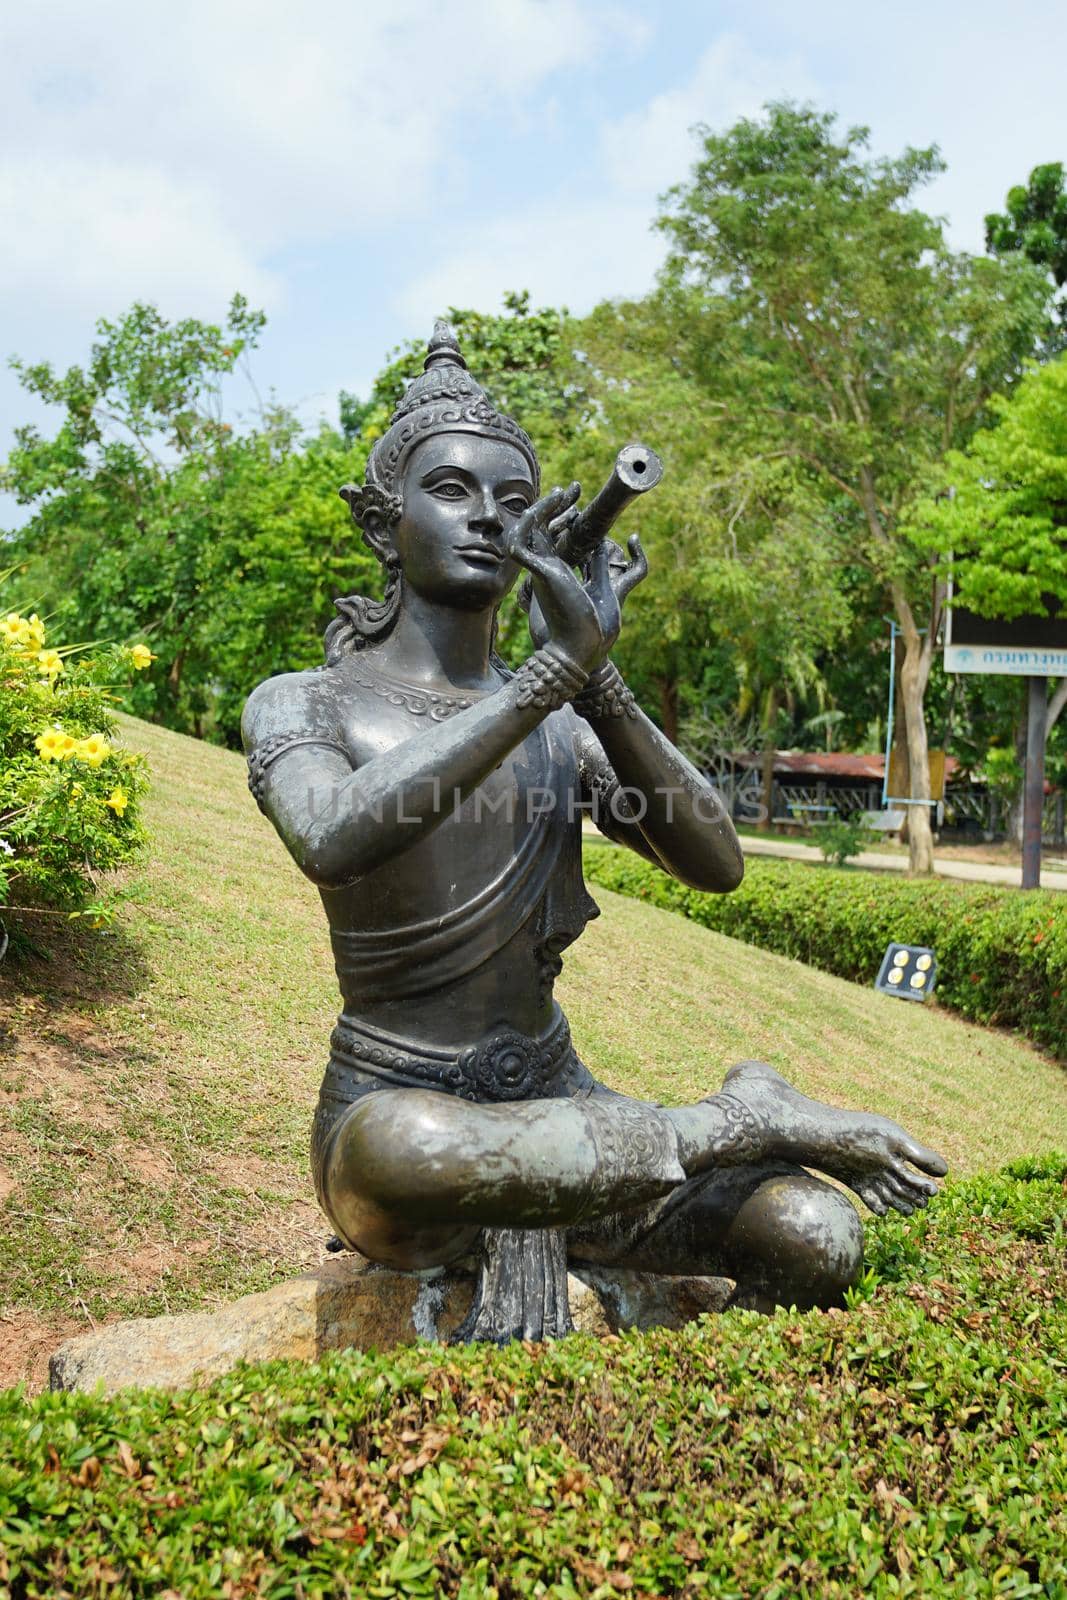 Rayong, Thailand - April 13, 2021: Phra Aphai Mani is main character in The famous Thai poet Phra Aphai Mani at Phra Sunthonwohan park in Rayong, Thailand.